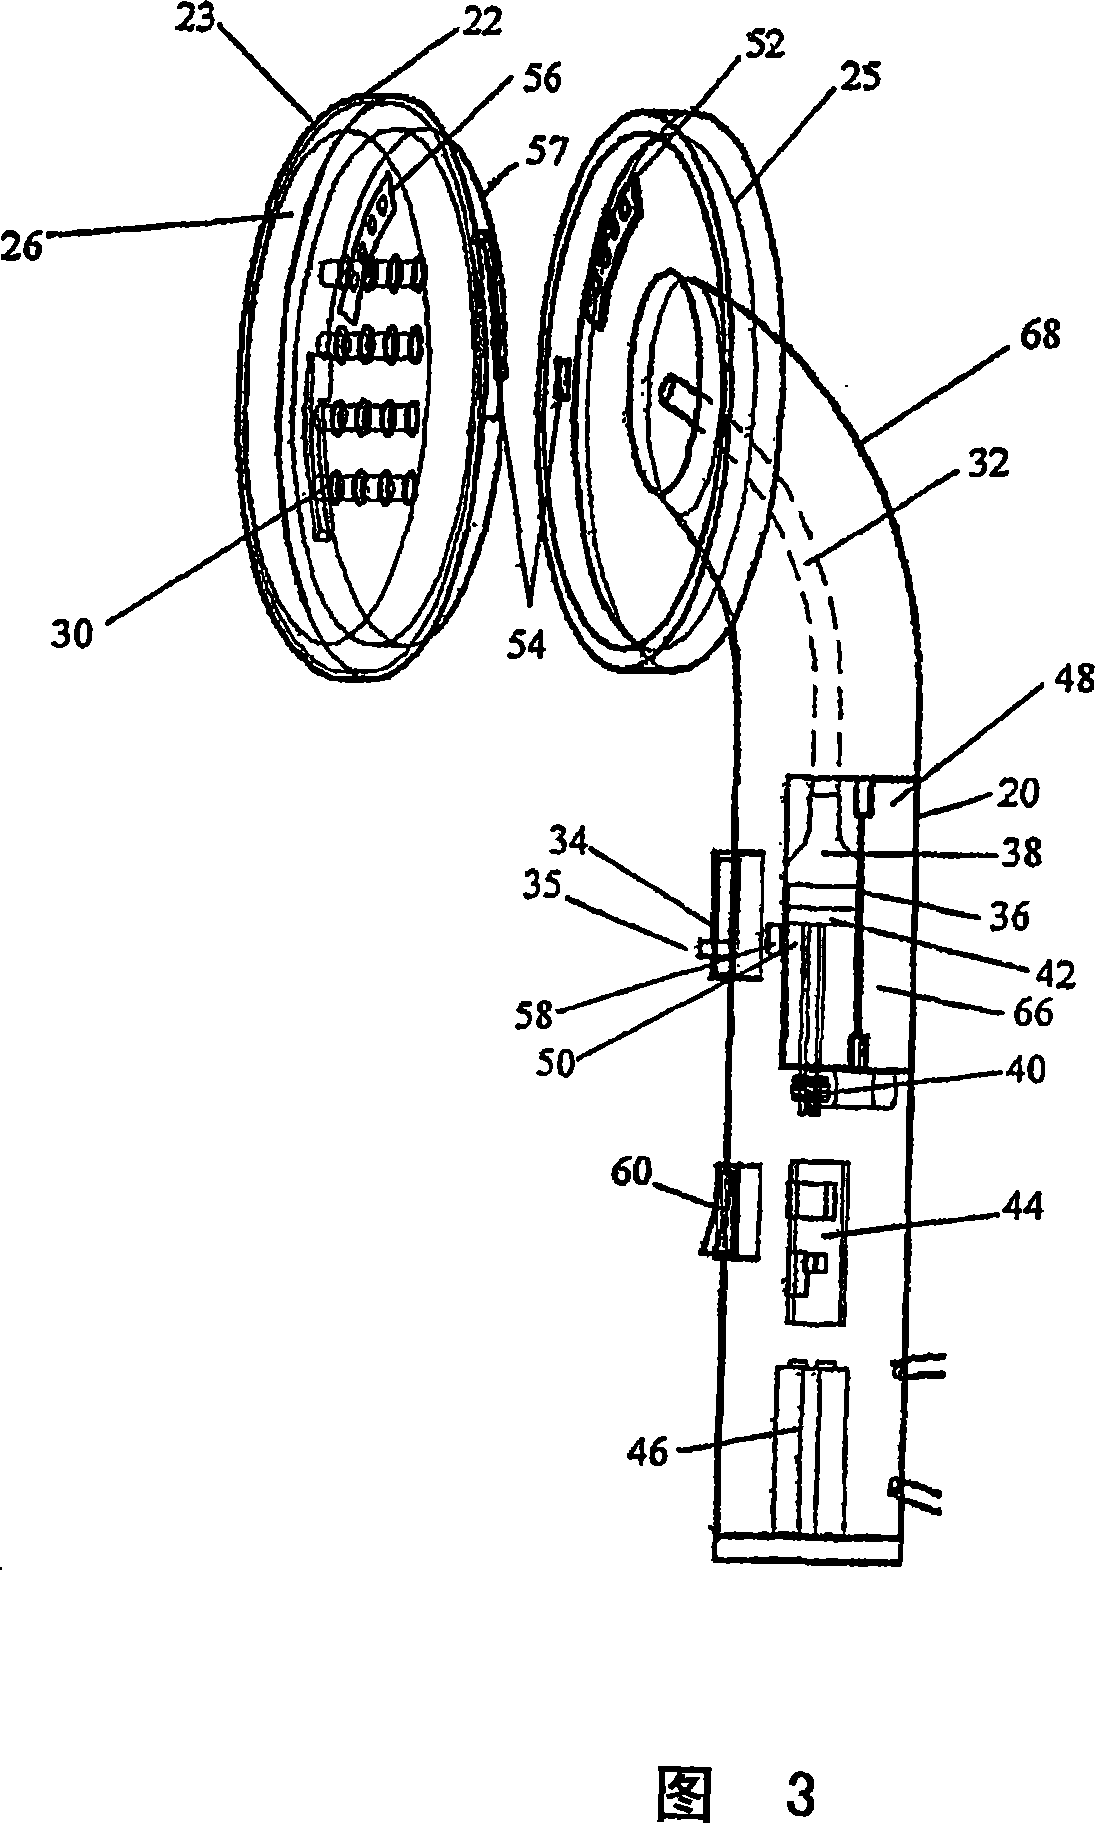 Therapy device and related accessories, compositions, and treatment methods